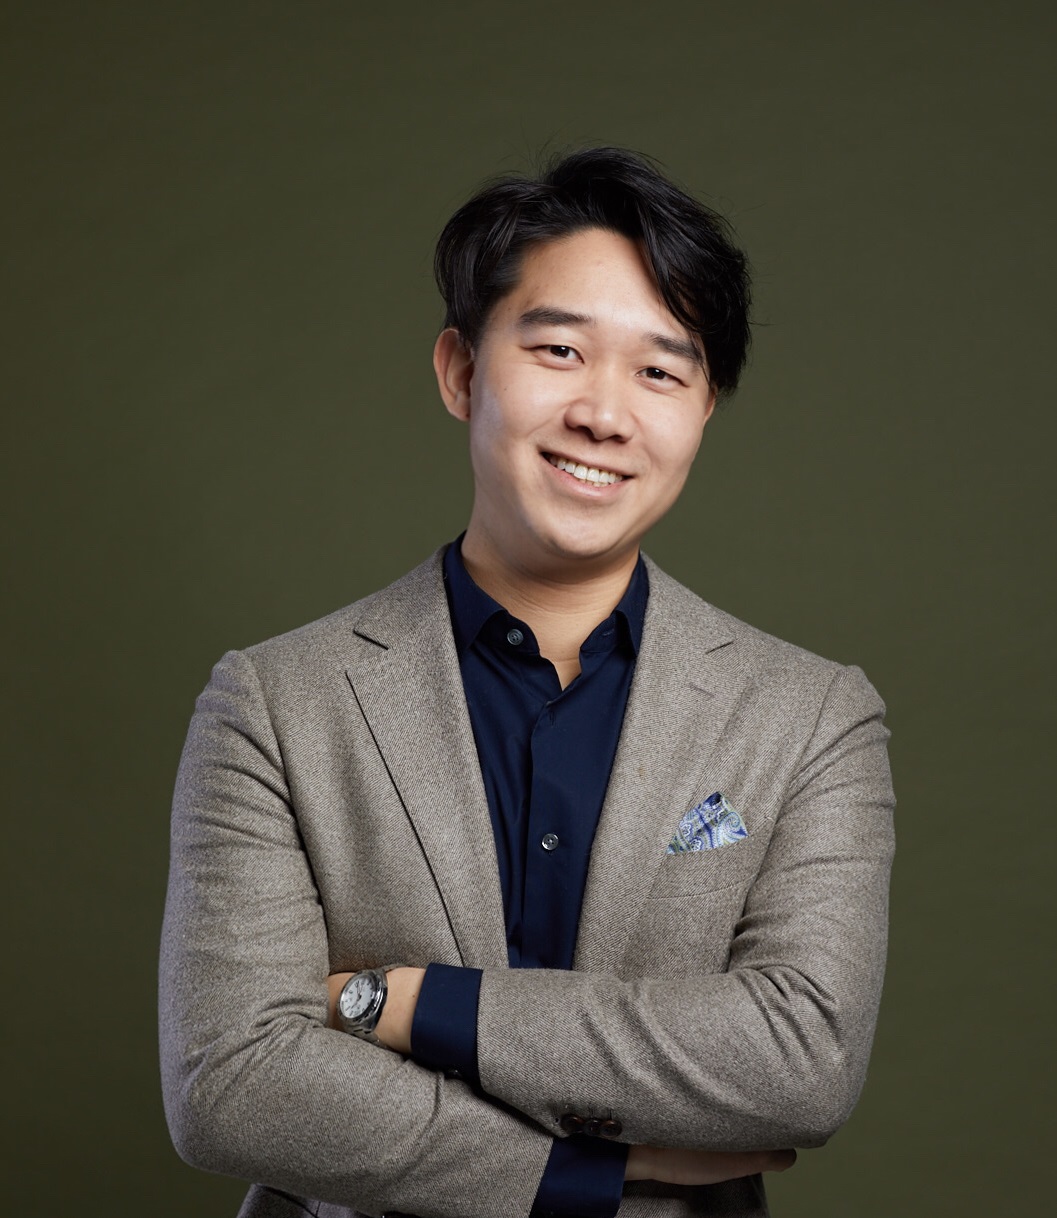 Daniel Cheng joined the C2A jury board